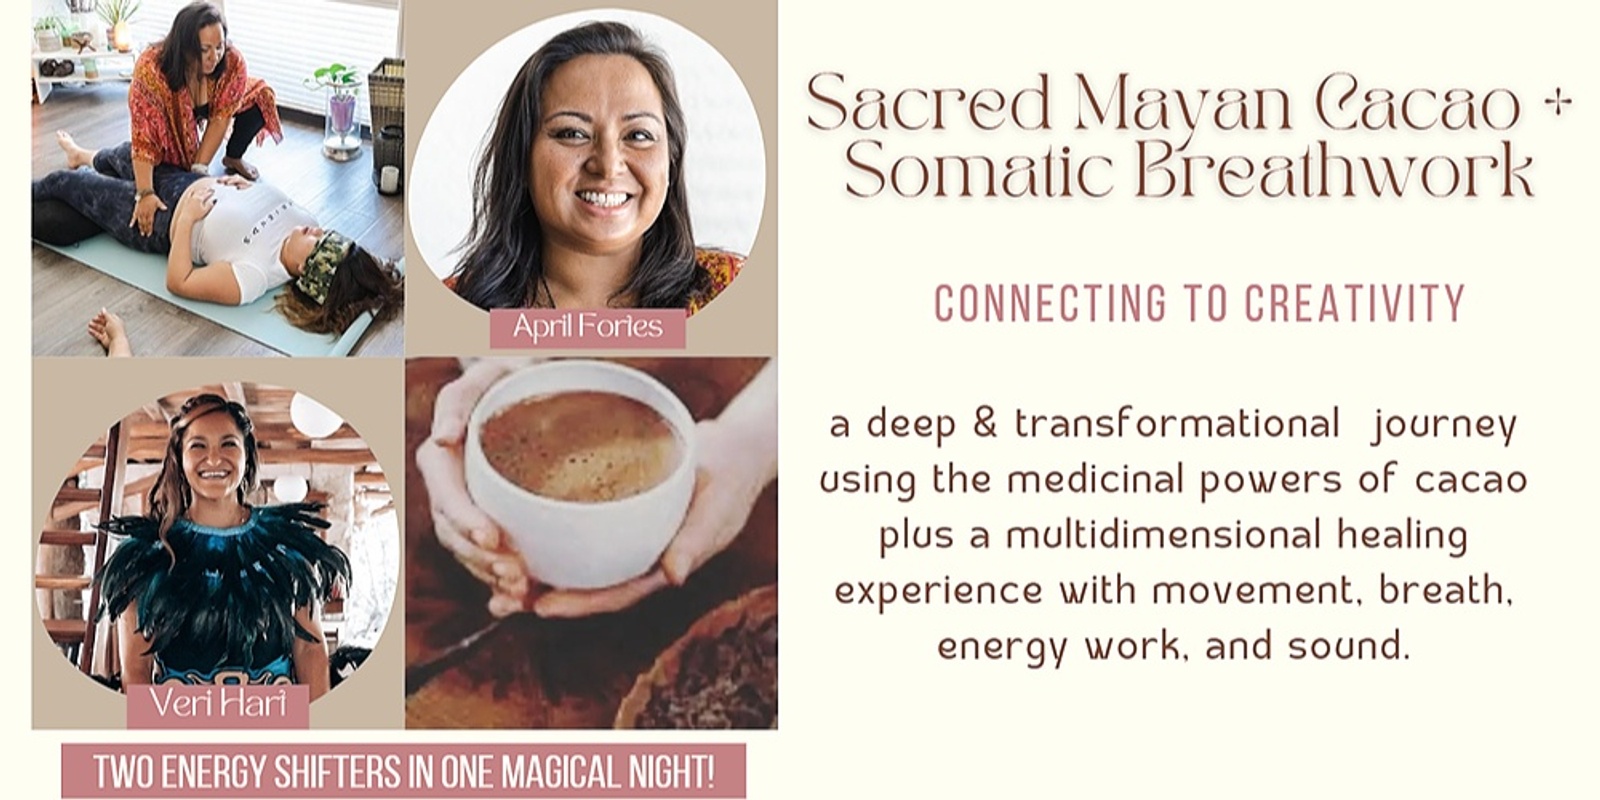 Banner image for Sacred Mayan Cacao + Somatic Breathwork Journey